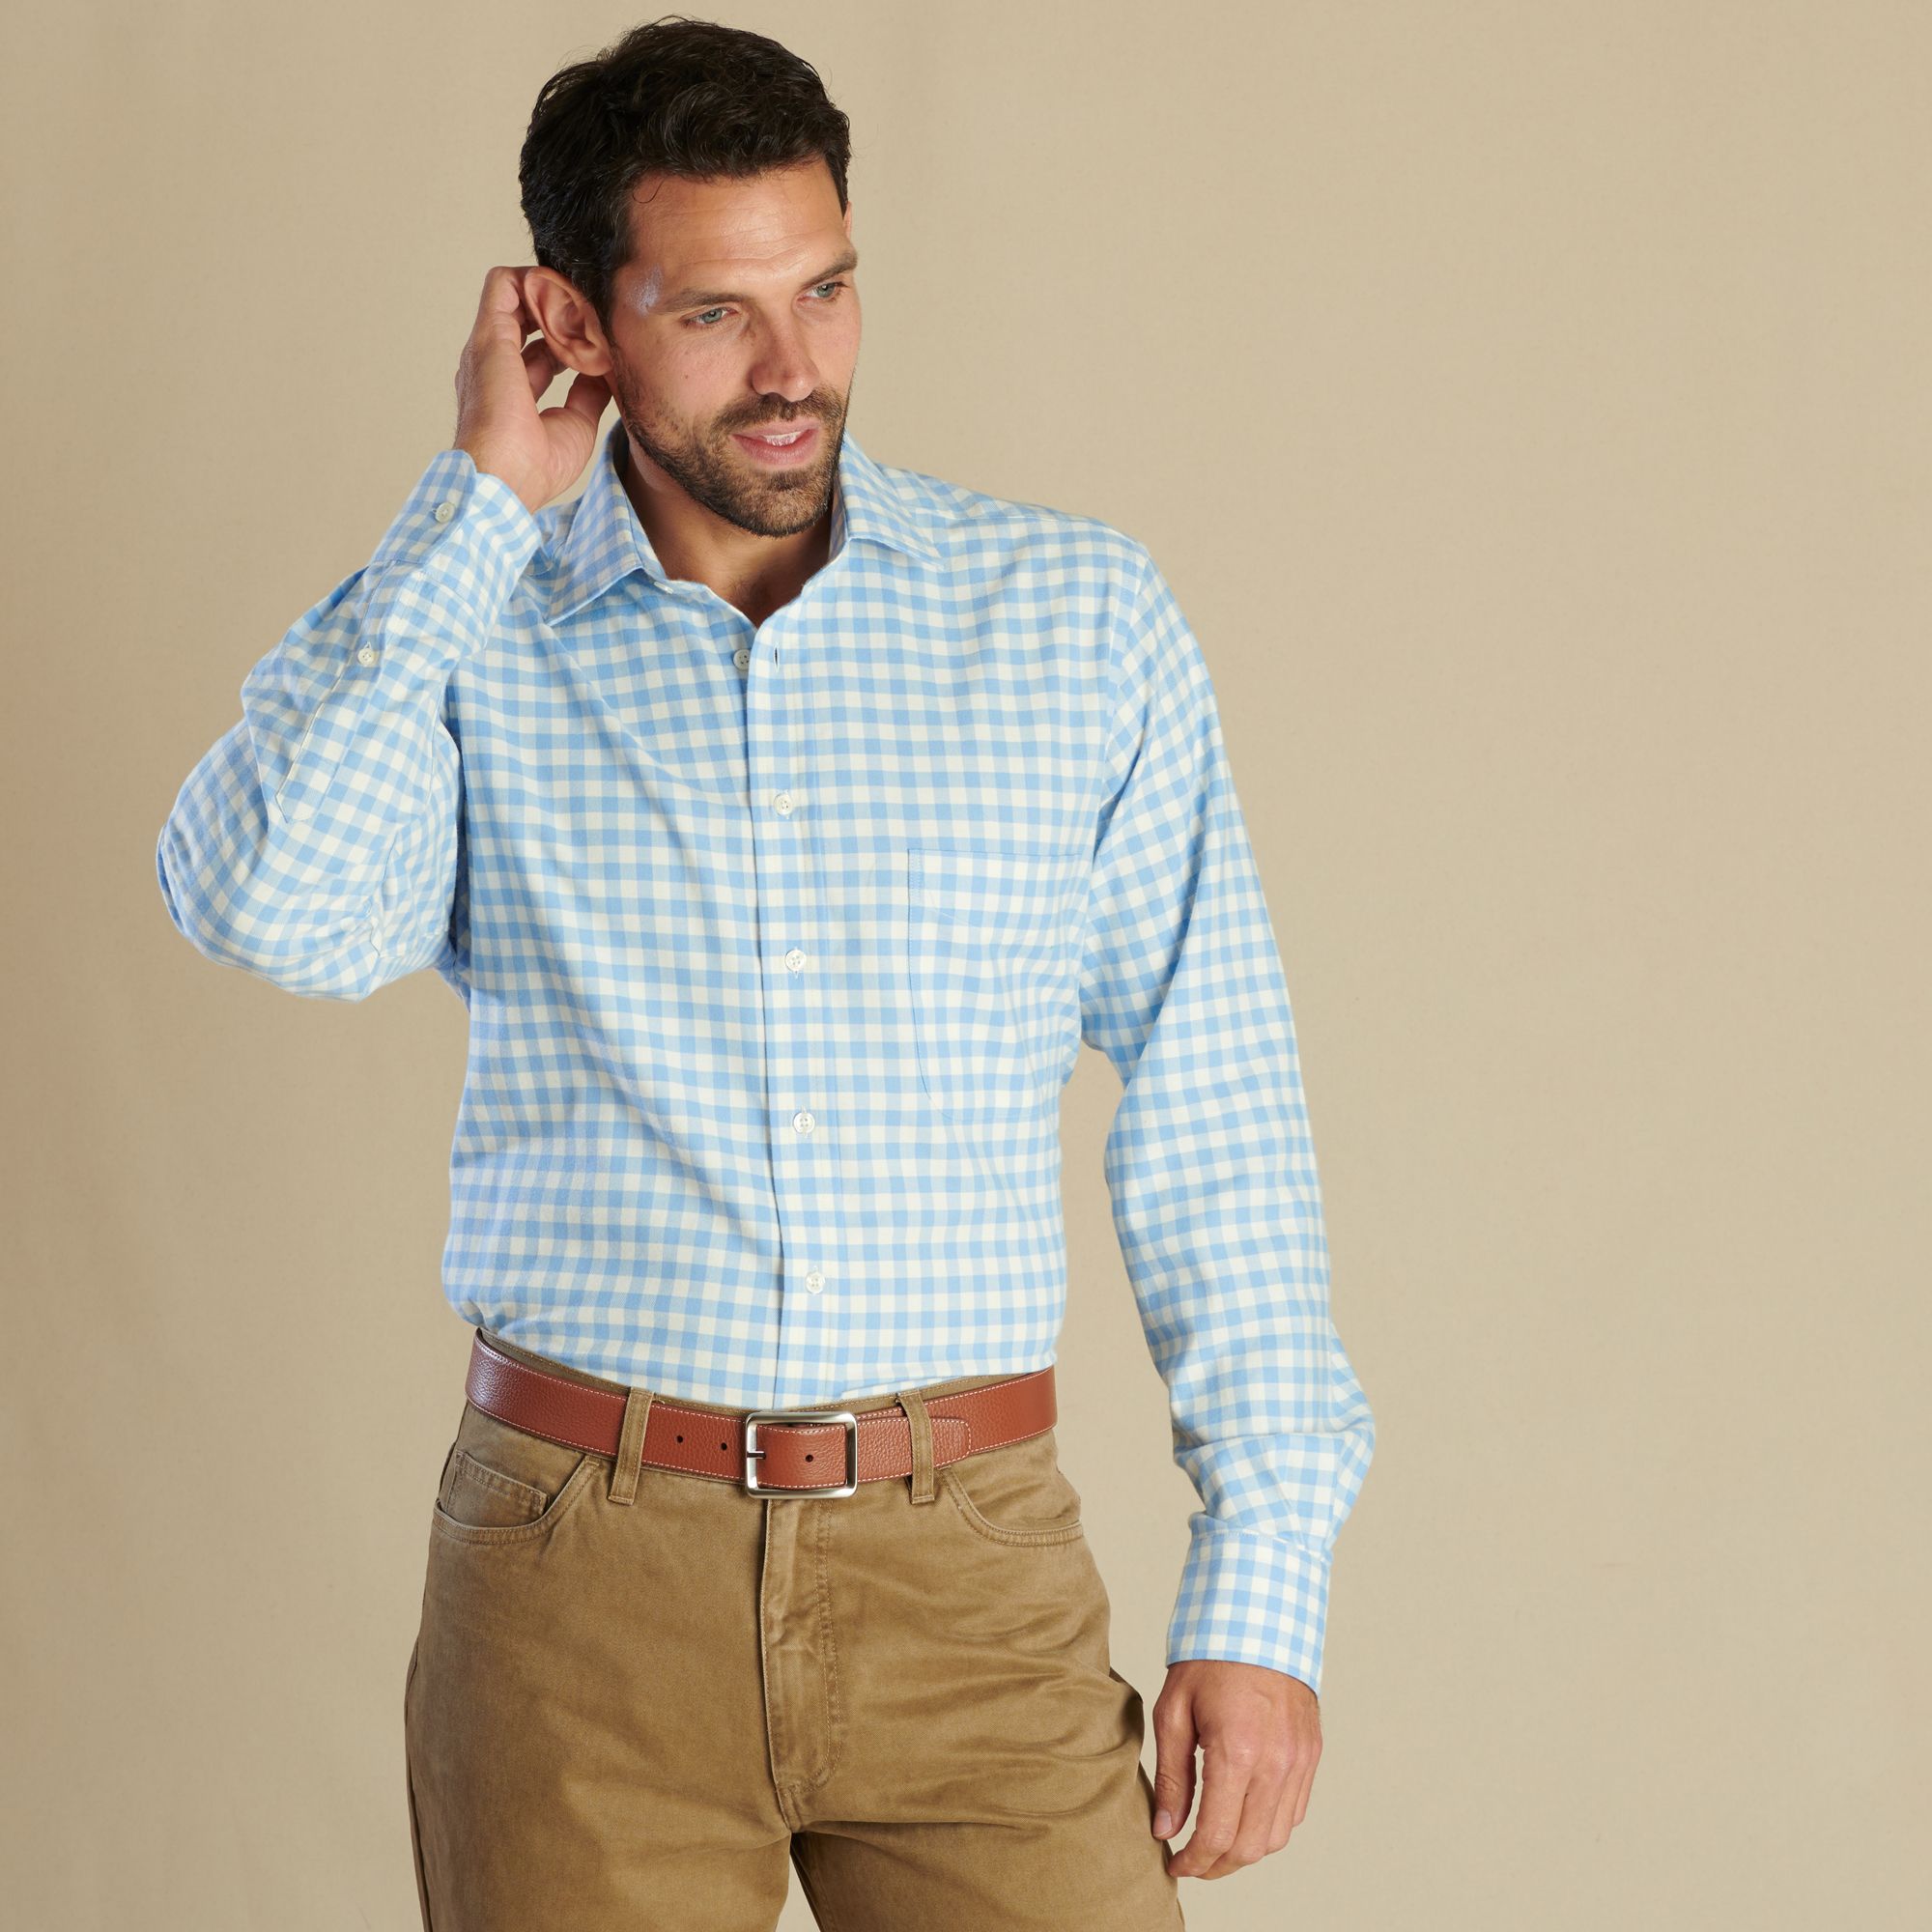 Blue Gingham Brushed Shirt | Men's Country Clothing | Cordings